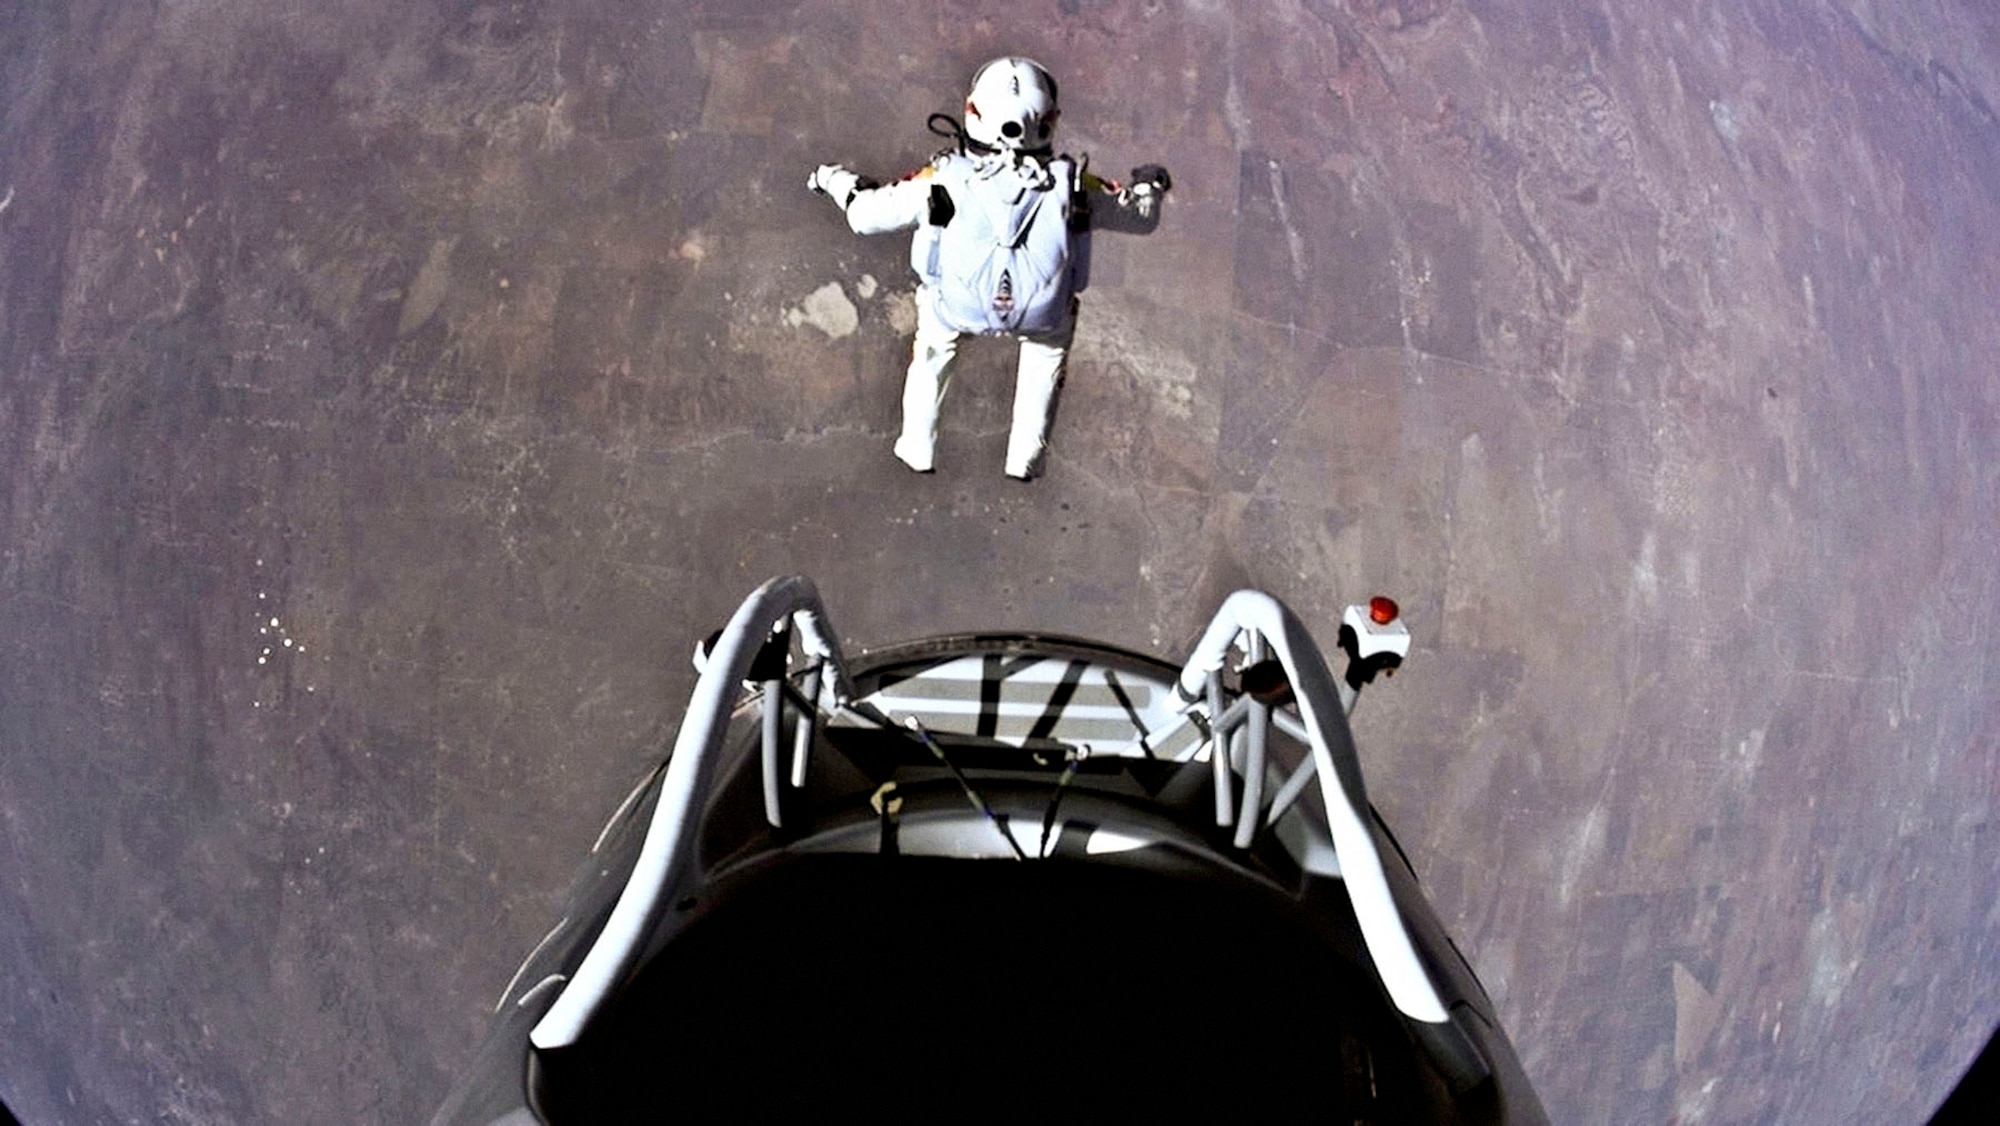 Pilot Felix Baumgartner of Austria jumps out from the capsule during the final manned flight for Red Bull Stratos in Roswell, N.M., on Oct. 14, 2012. The Red Bull Stratos exhibit will be on display at the National Museum of the U.S. Air Force from Jan. 24-March 16, 2014. (Photo courtesy of Red Bull Stratos)